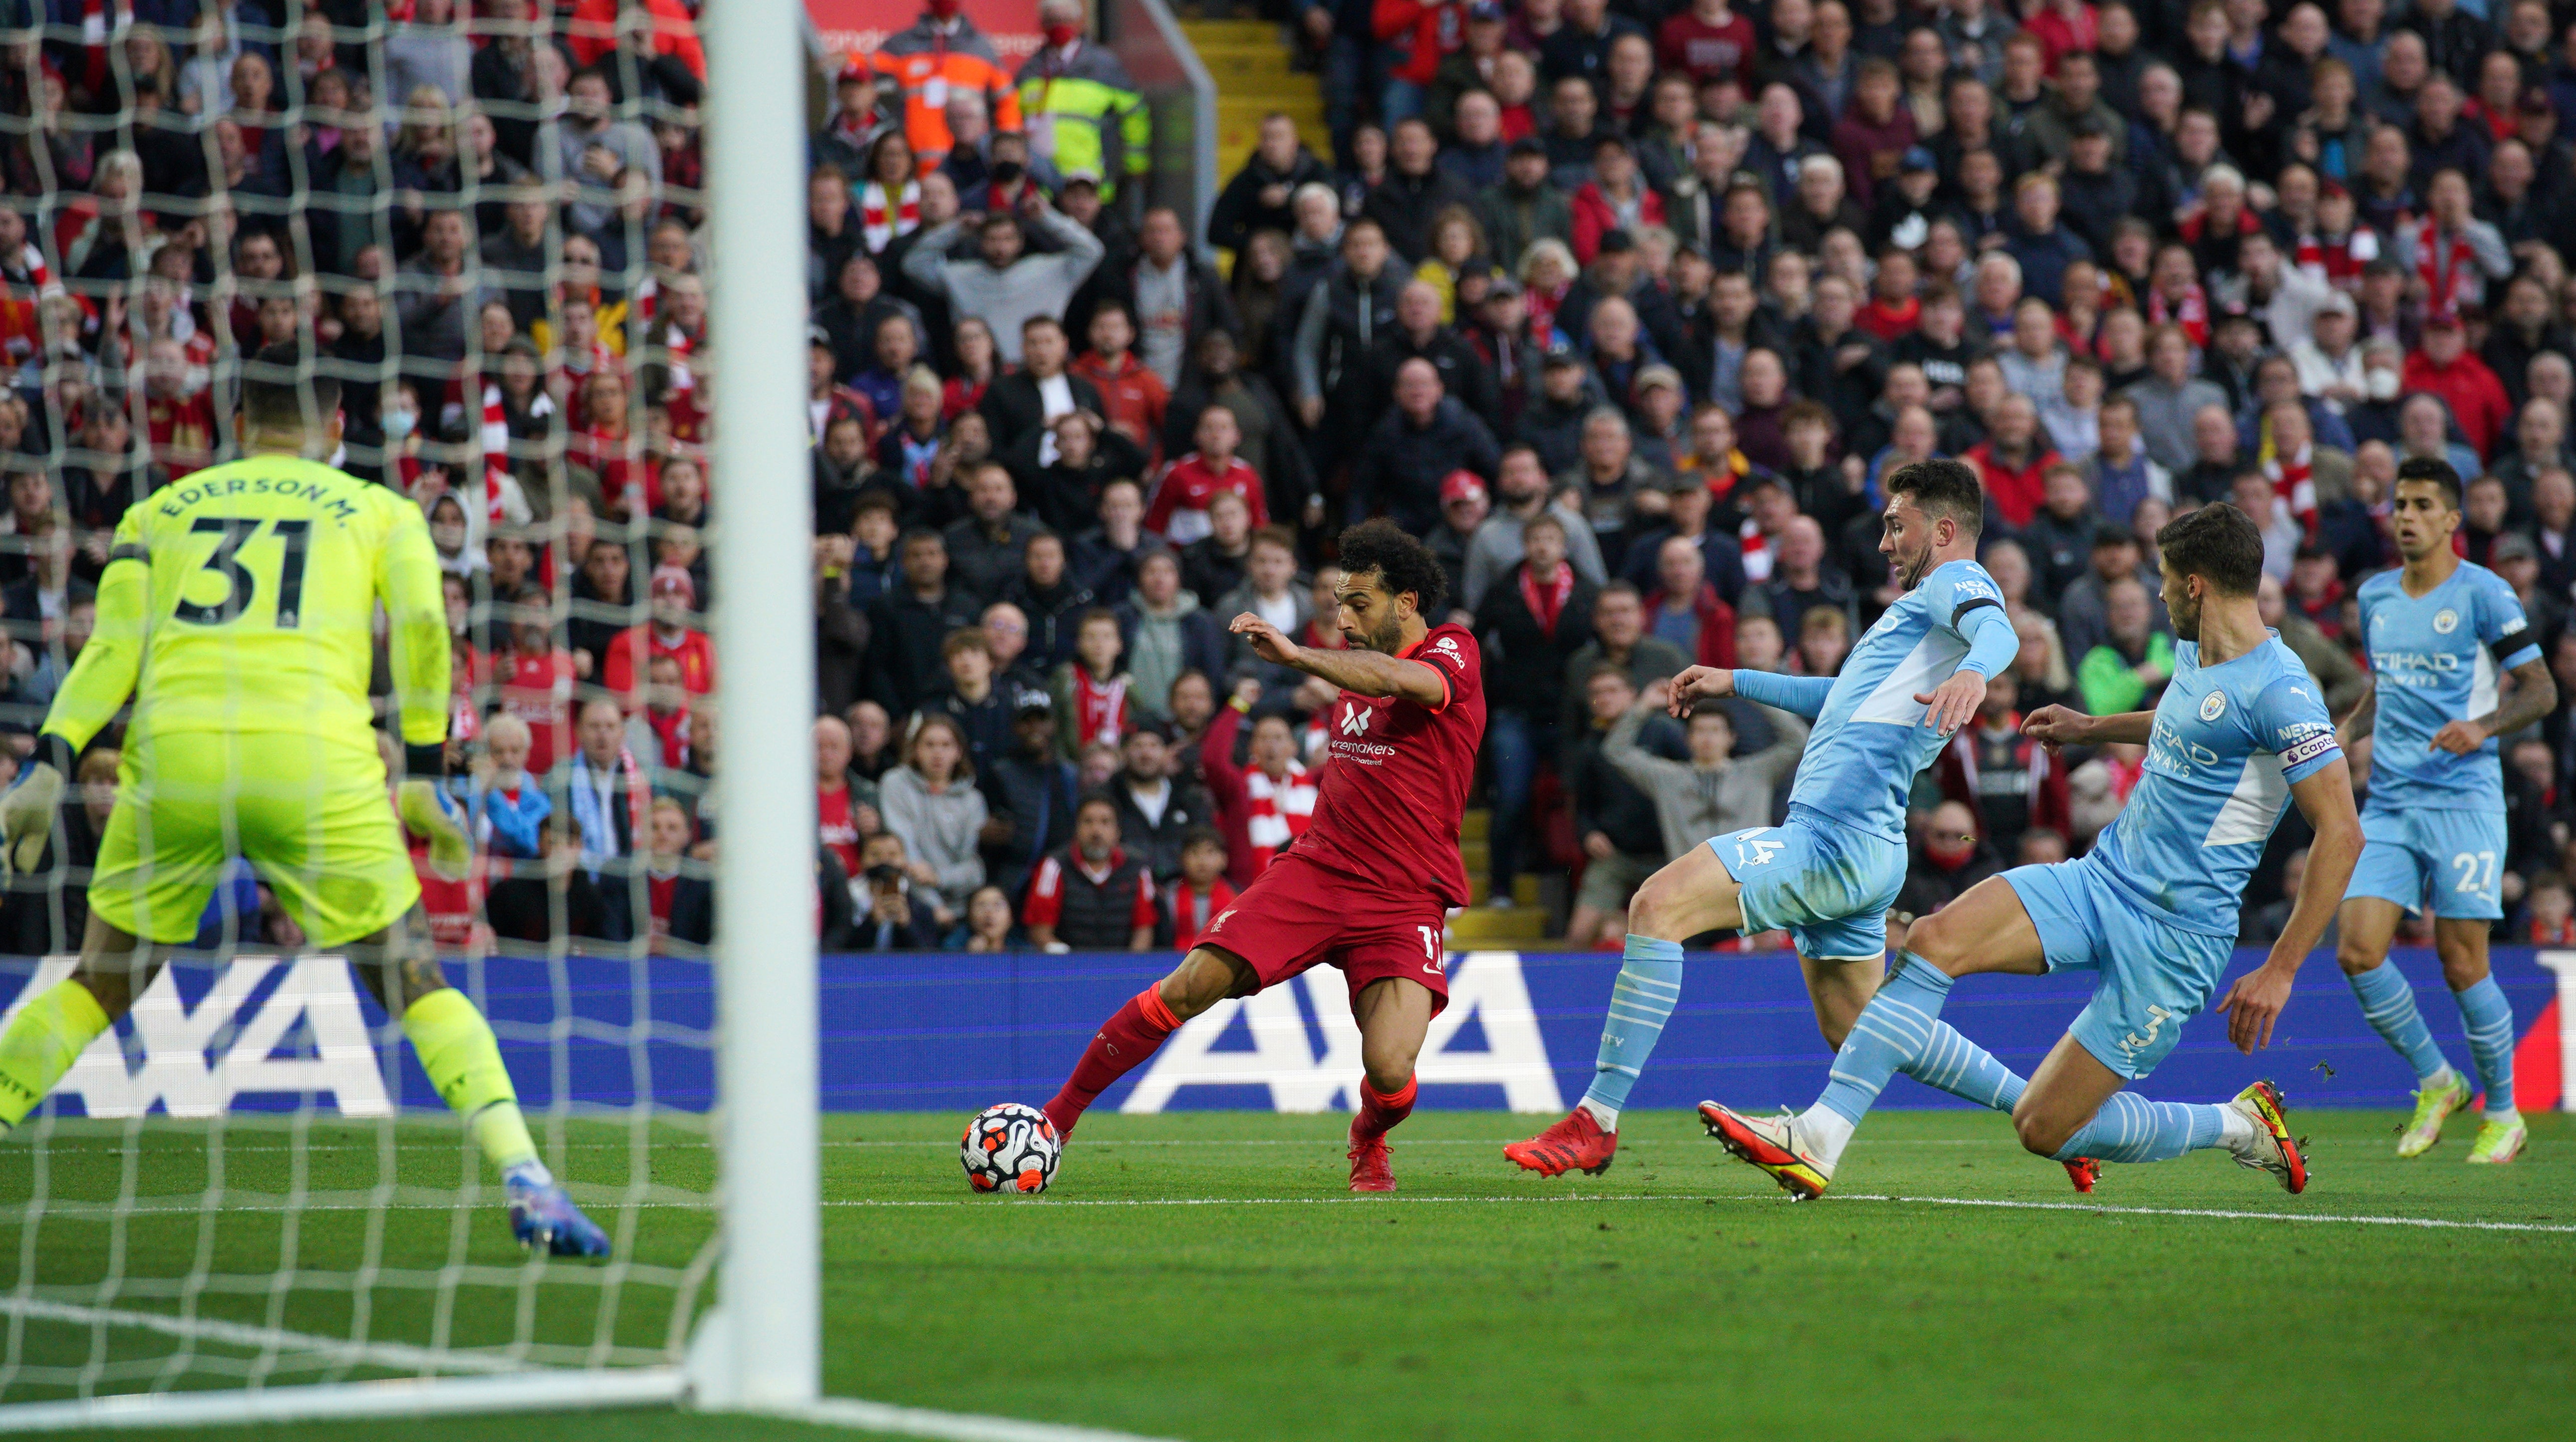 Mohamed Salah scored for Liverpool in their 2-2 draw against Manchester City (Peter Byrne/PA)